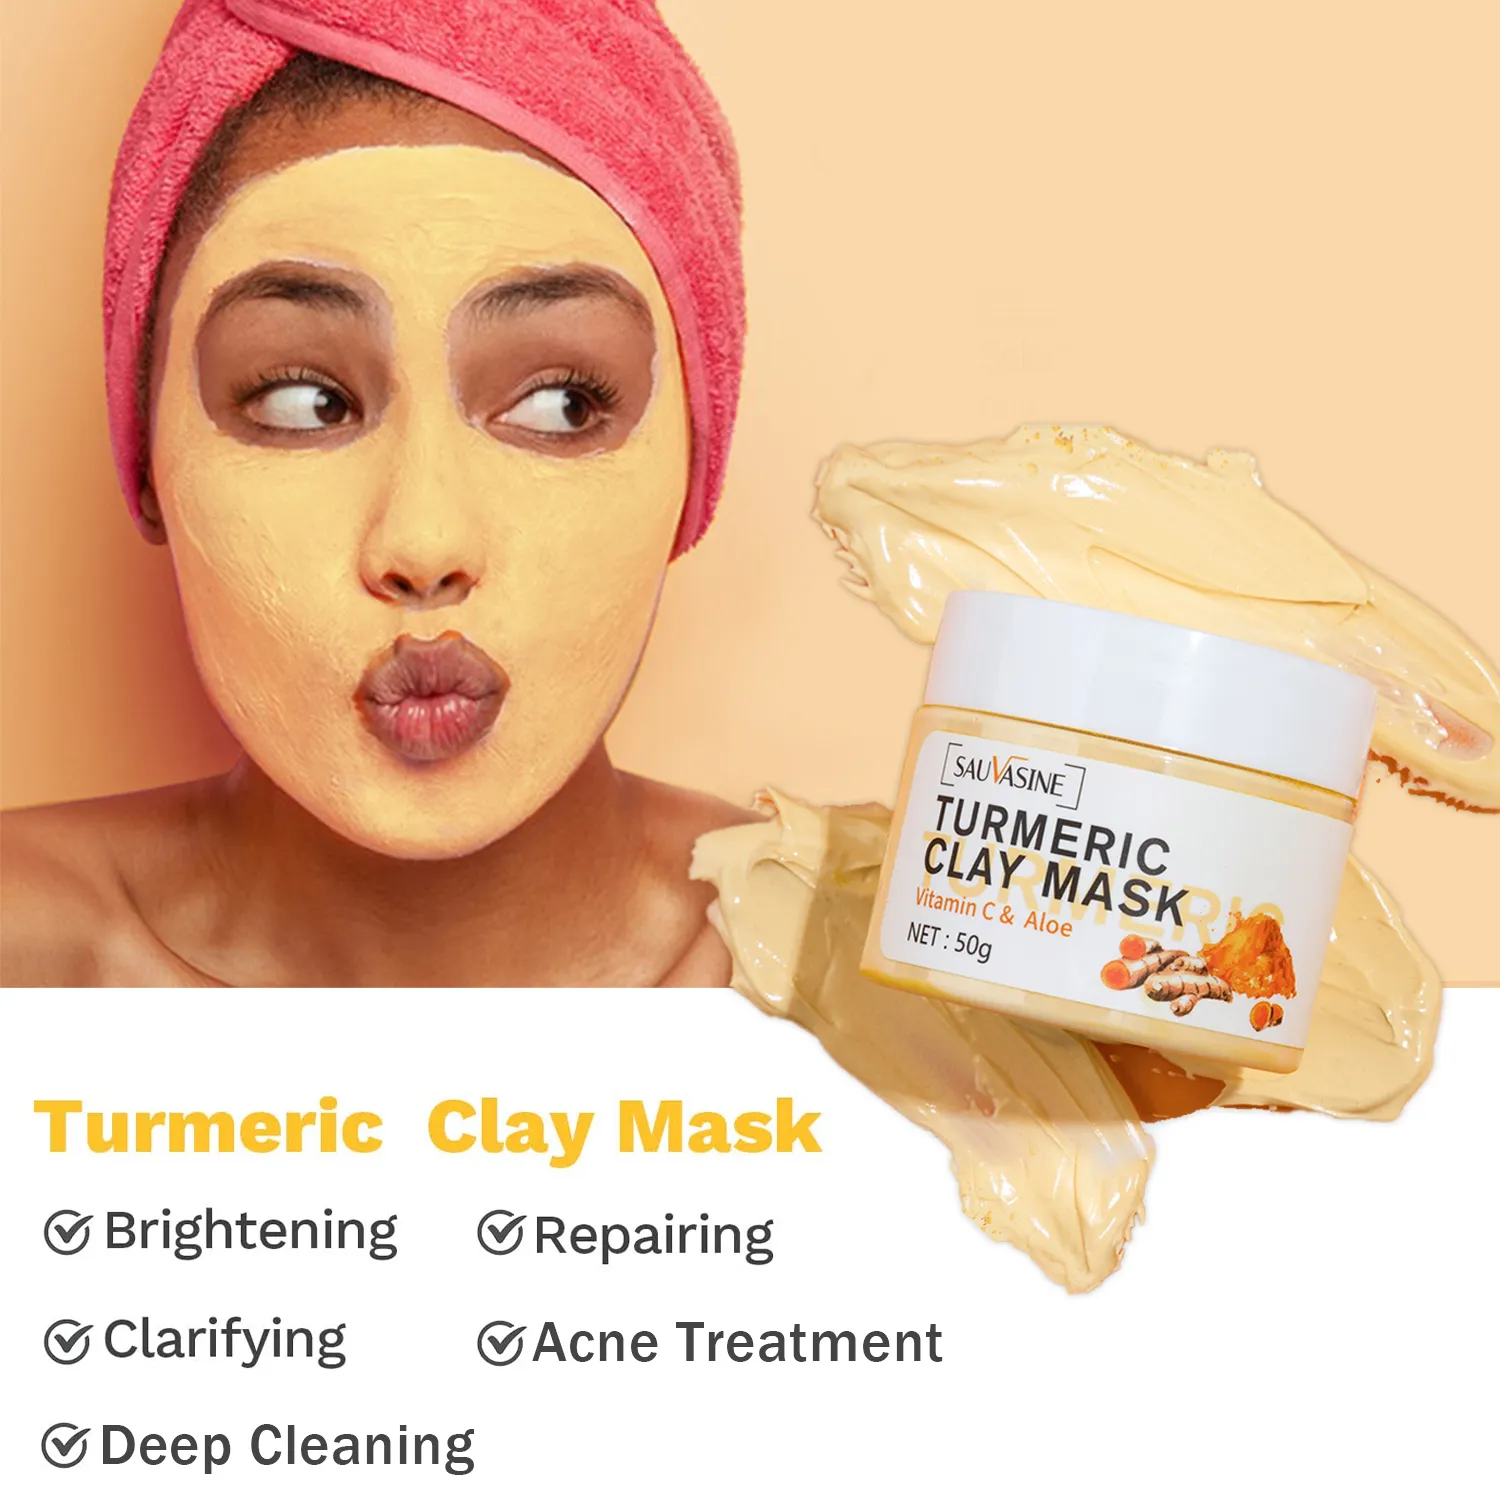 Professional Turmeric Mud Clay Face Mask Whitening Vitamin C Acne Treatment Dark Spots Remover Deep Cleaning Brightening Cream 1 4pcs professional diy stainless steel polymer clay tools filling and caulking kit tile grout floor pressure seam stick